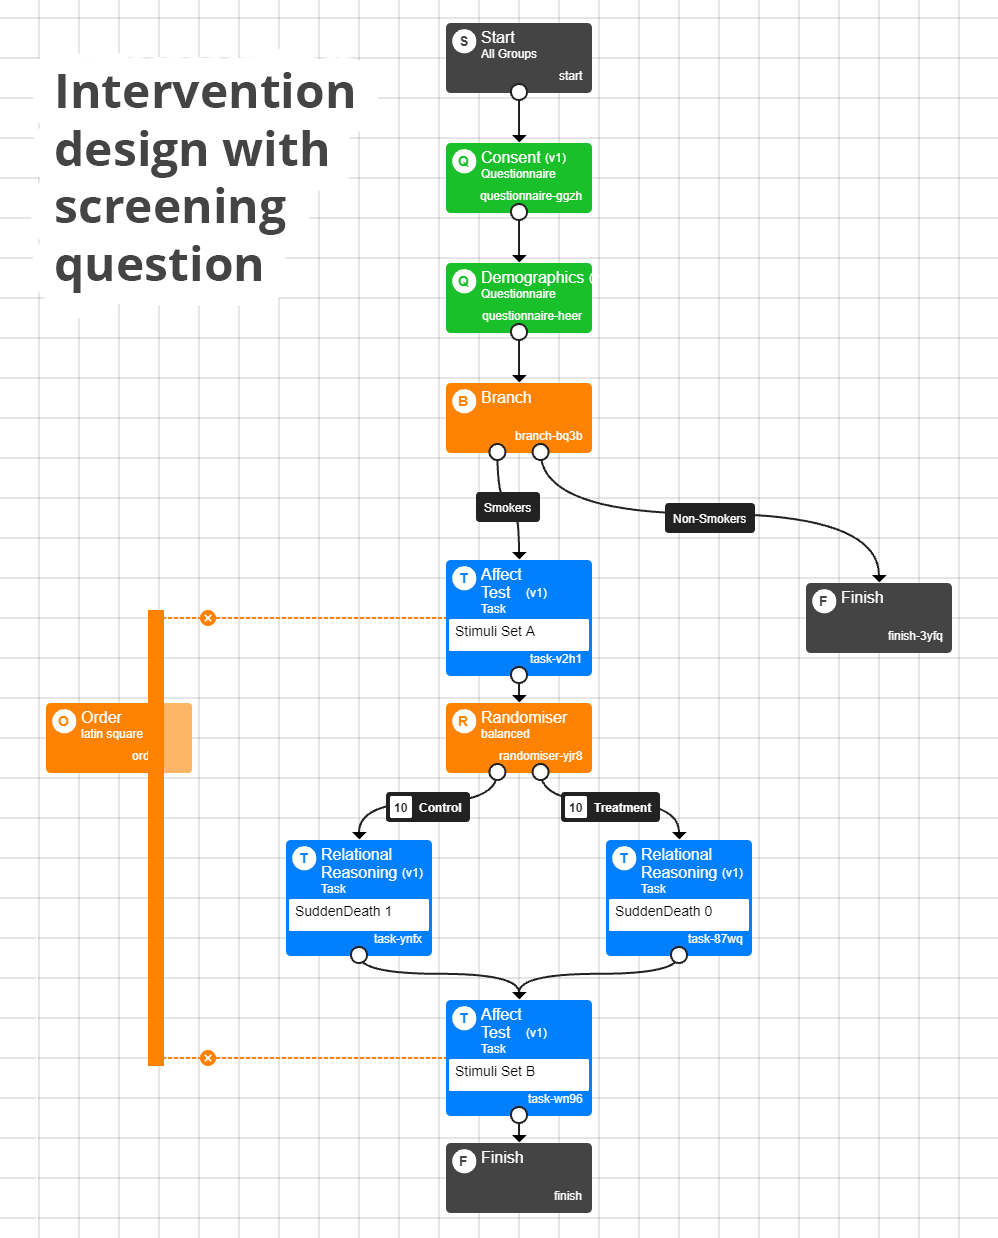 Screenshot of Experiment Builder showing an intervention design with a screening question